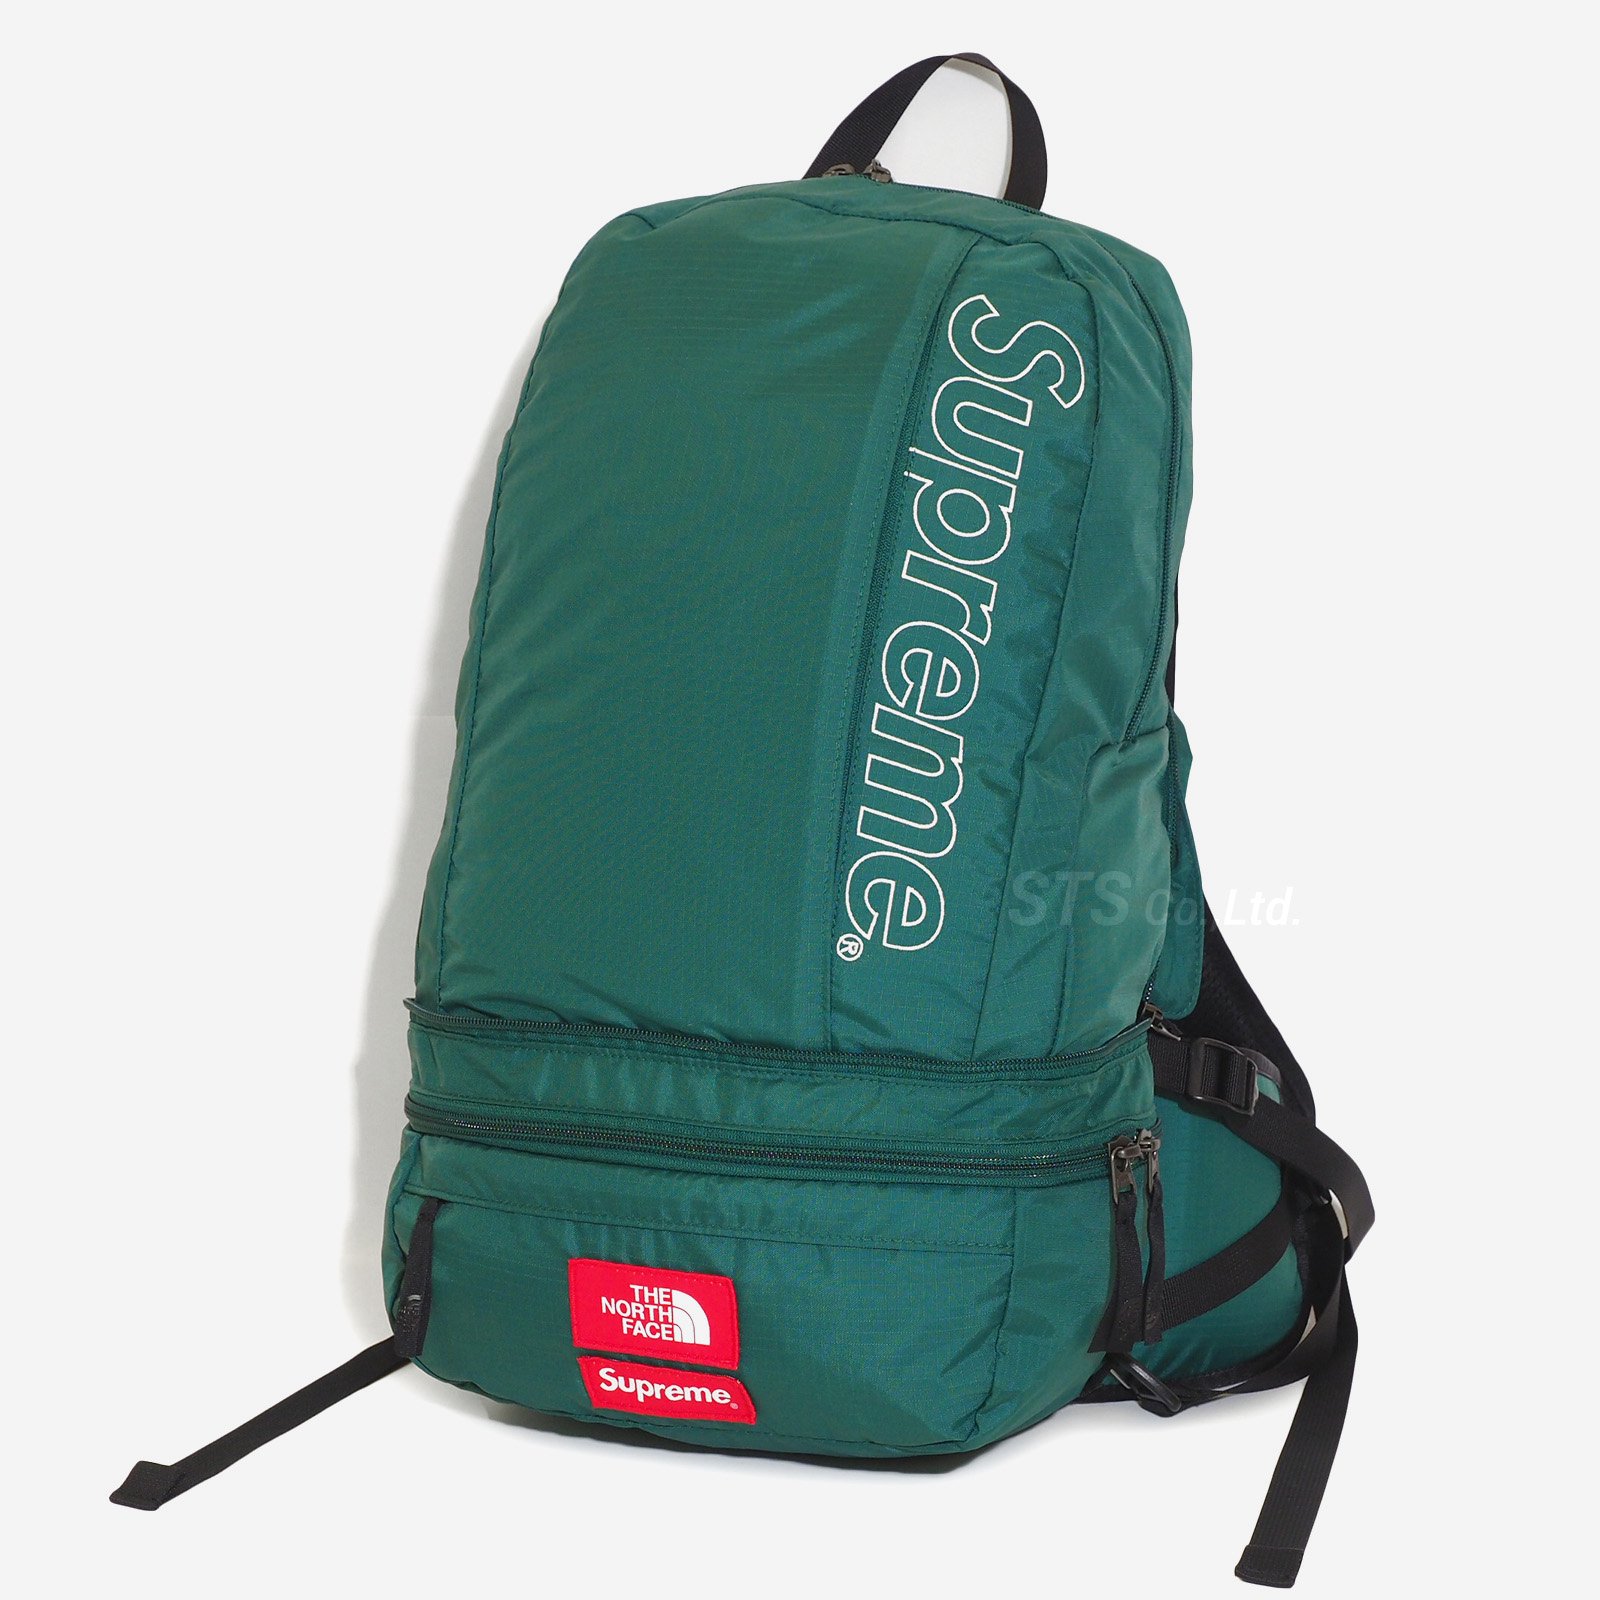 Supreme/The North Face Trekking Convertible Backpack + Waist Bag